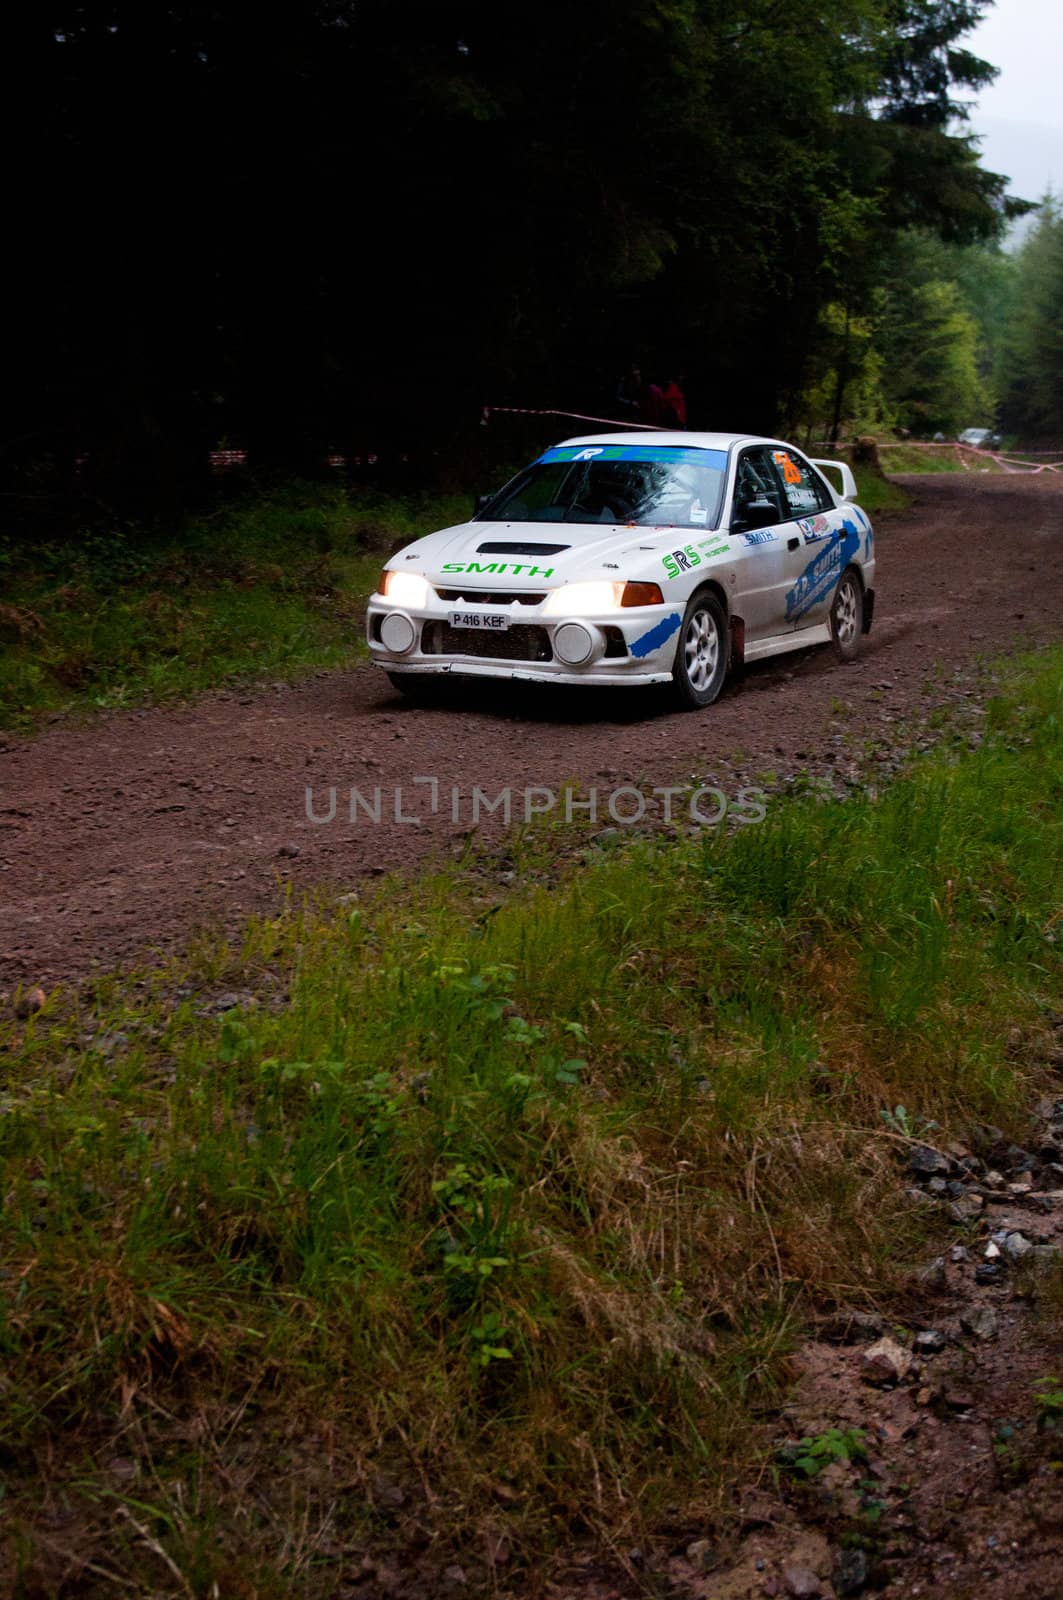 MALLOW, IRELAND - MAY 19: D. Smith driving Mitsubishi Evo at the Jim Walsh Cork Forest Rally on May 19, 2012 in Mallow, Ireland. 4th round of the Valvoline National Forest Rally Championship.